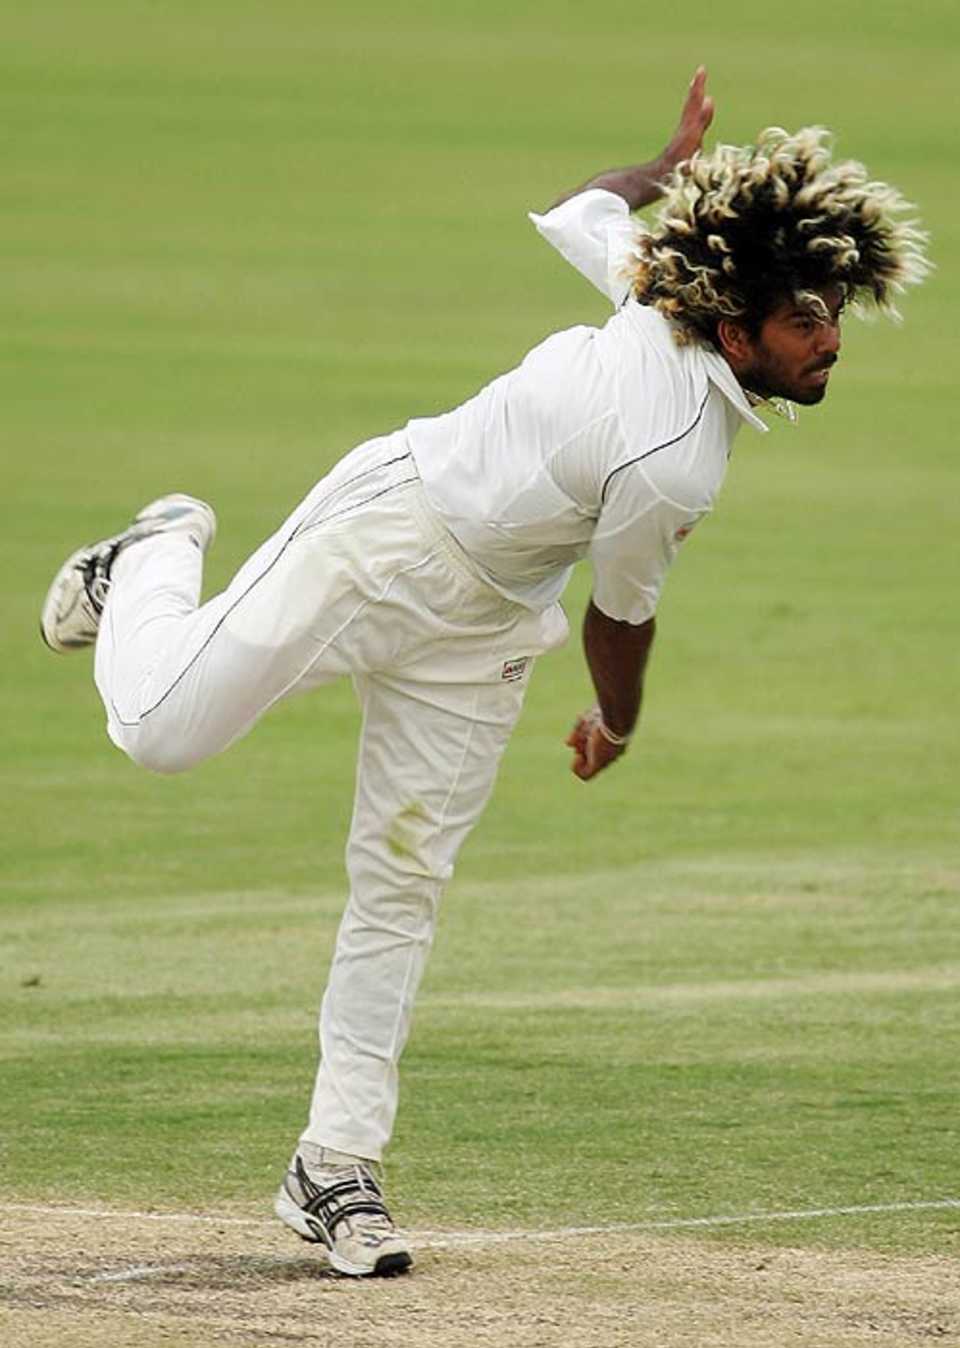 Lasith Malinga sends down a delivery